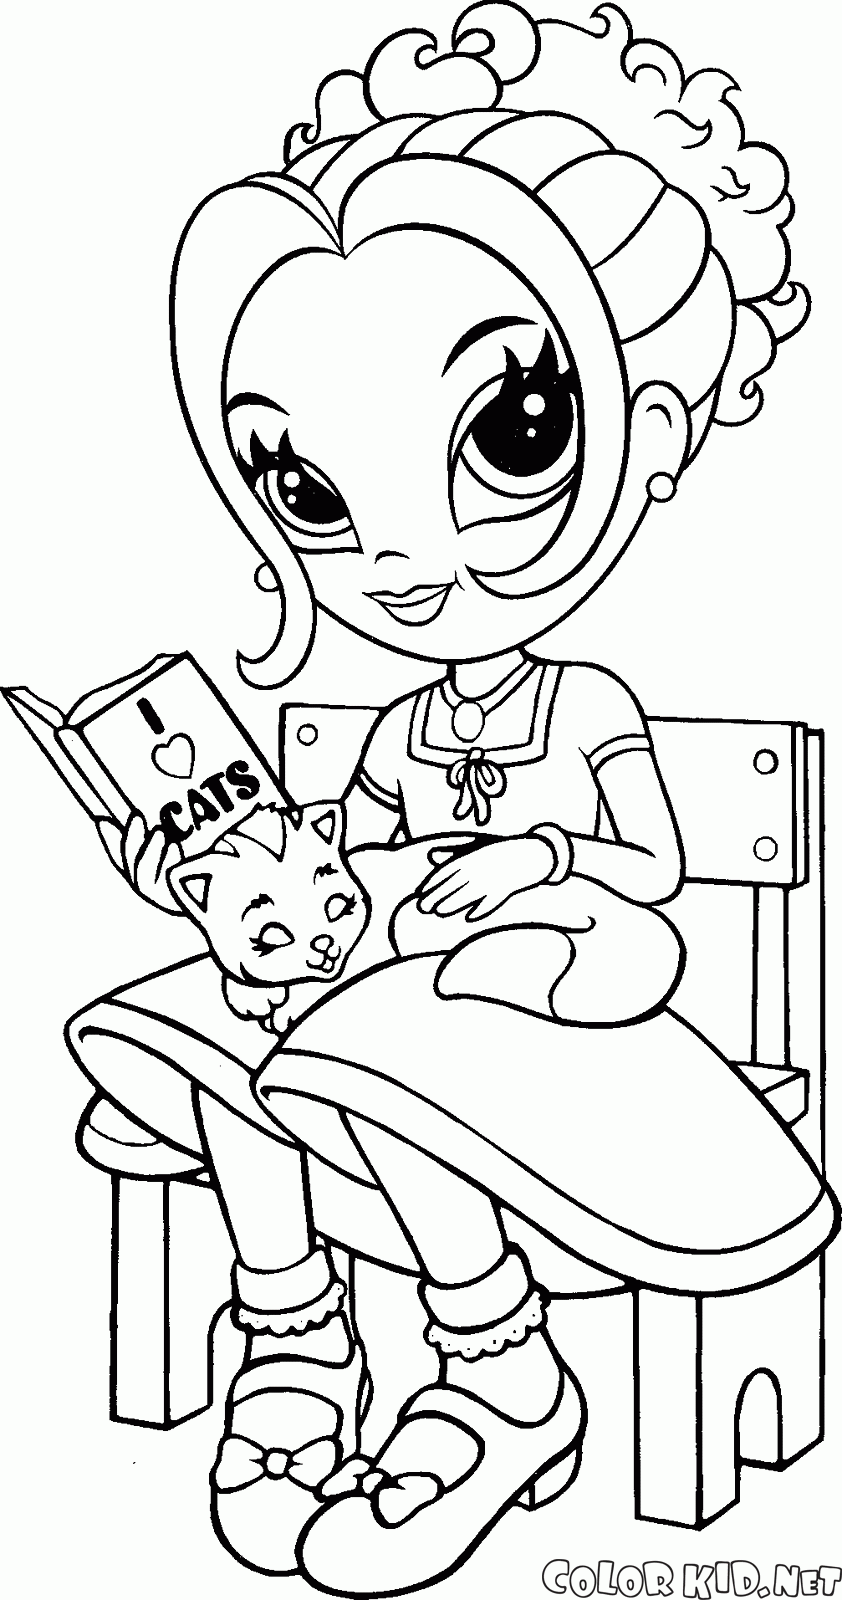 coloring page lisa frank glamour girl